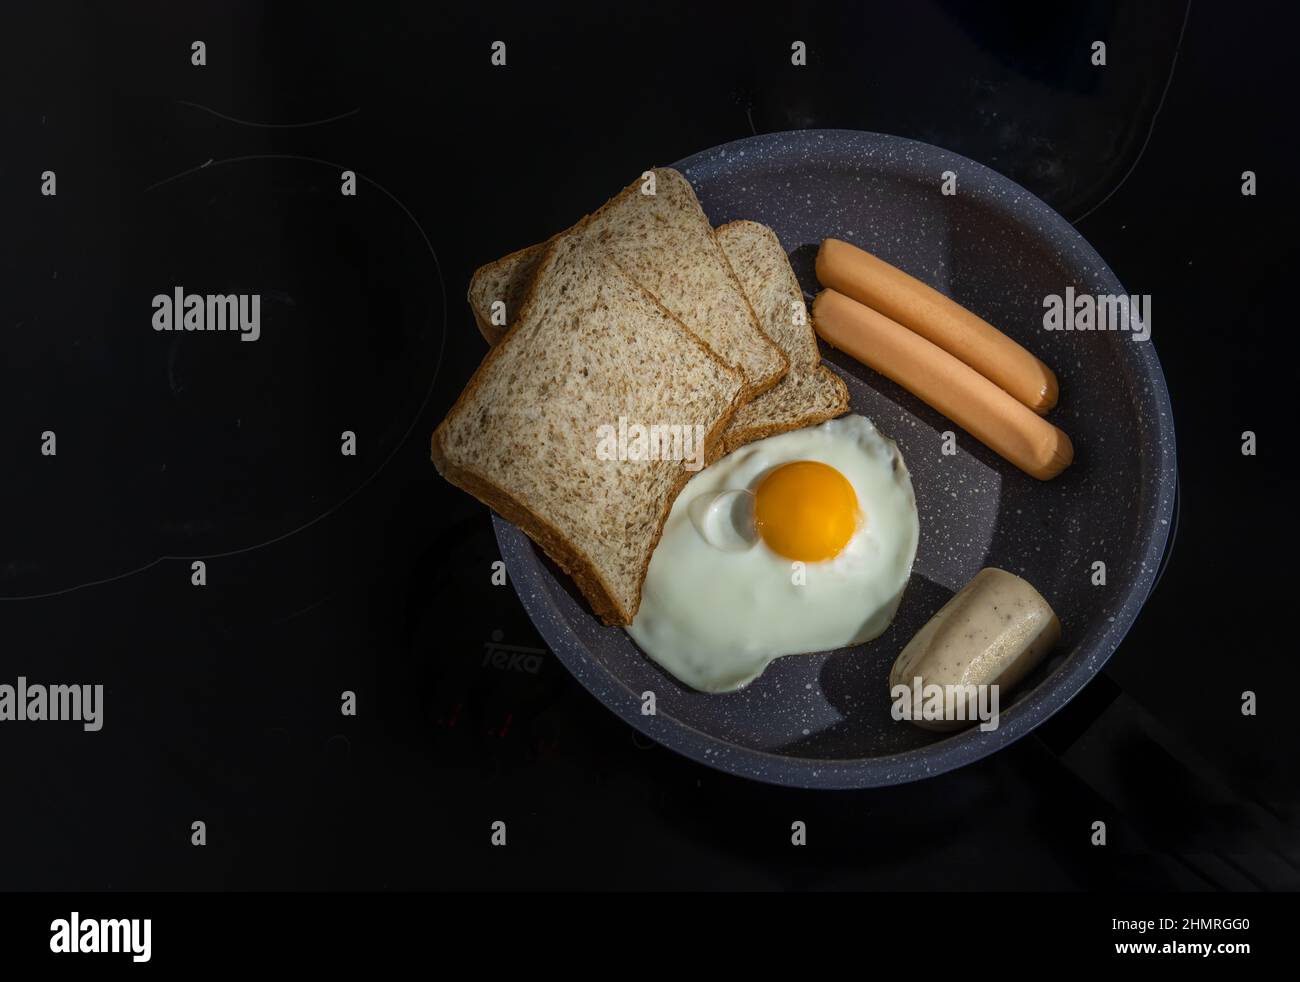 Preparing Breakfast in Cooking pan with Fried egg, Fried sausages, Breads and Vietnamese pork. Copy space, Selective focuse. Stock Photo